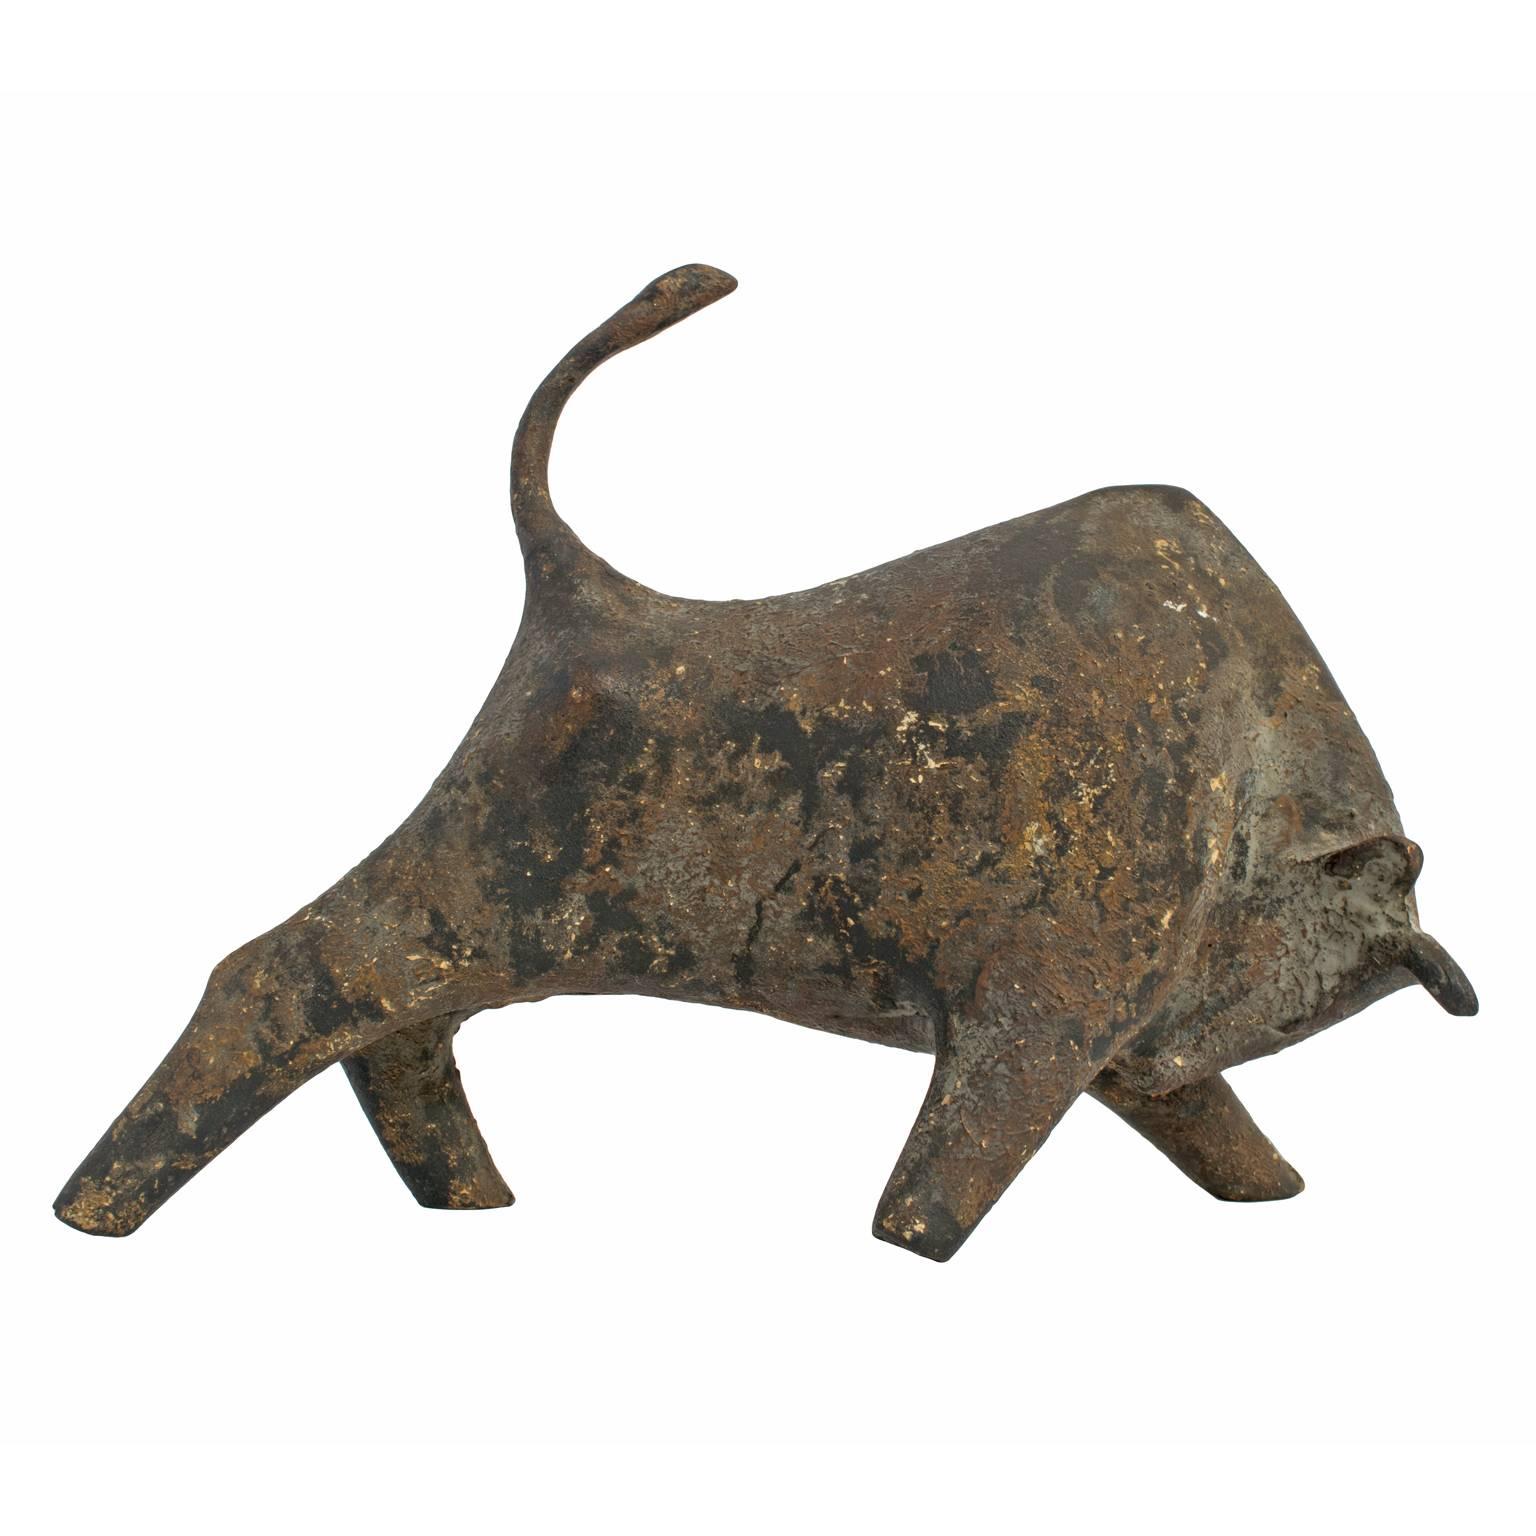 Mid-Century Brutalist bull figure in cast iron, with a beautiful rustic patina. Modernist and Picasso-esque, this Mid-Century Brutalist bull sculpture was purchased in Japan by its original owner and is thought to be designed by Miyazawa Kanae.